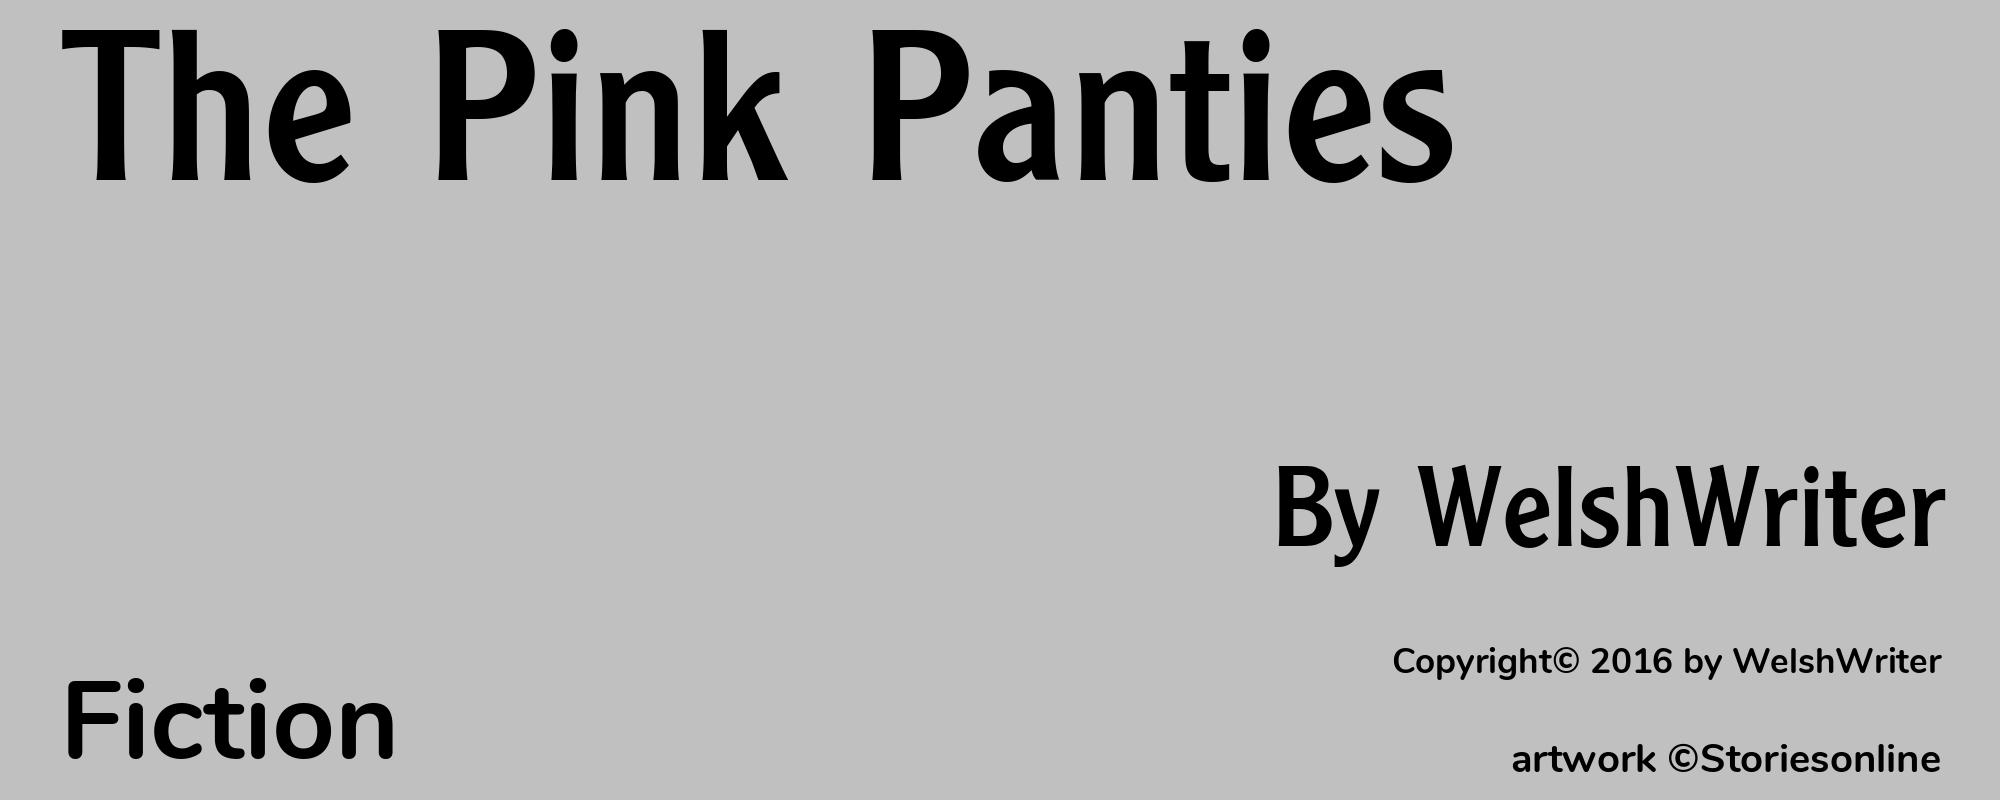 The Pink Panties - Cover